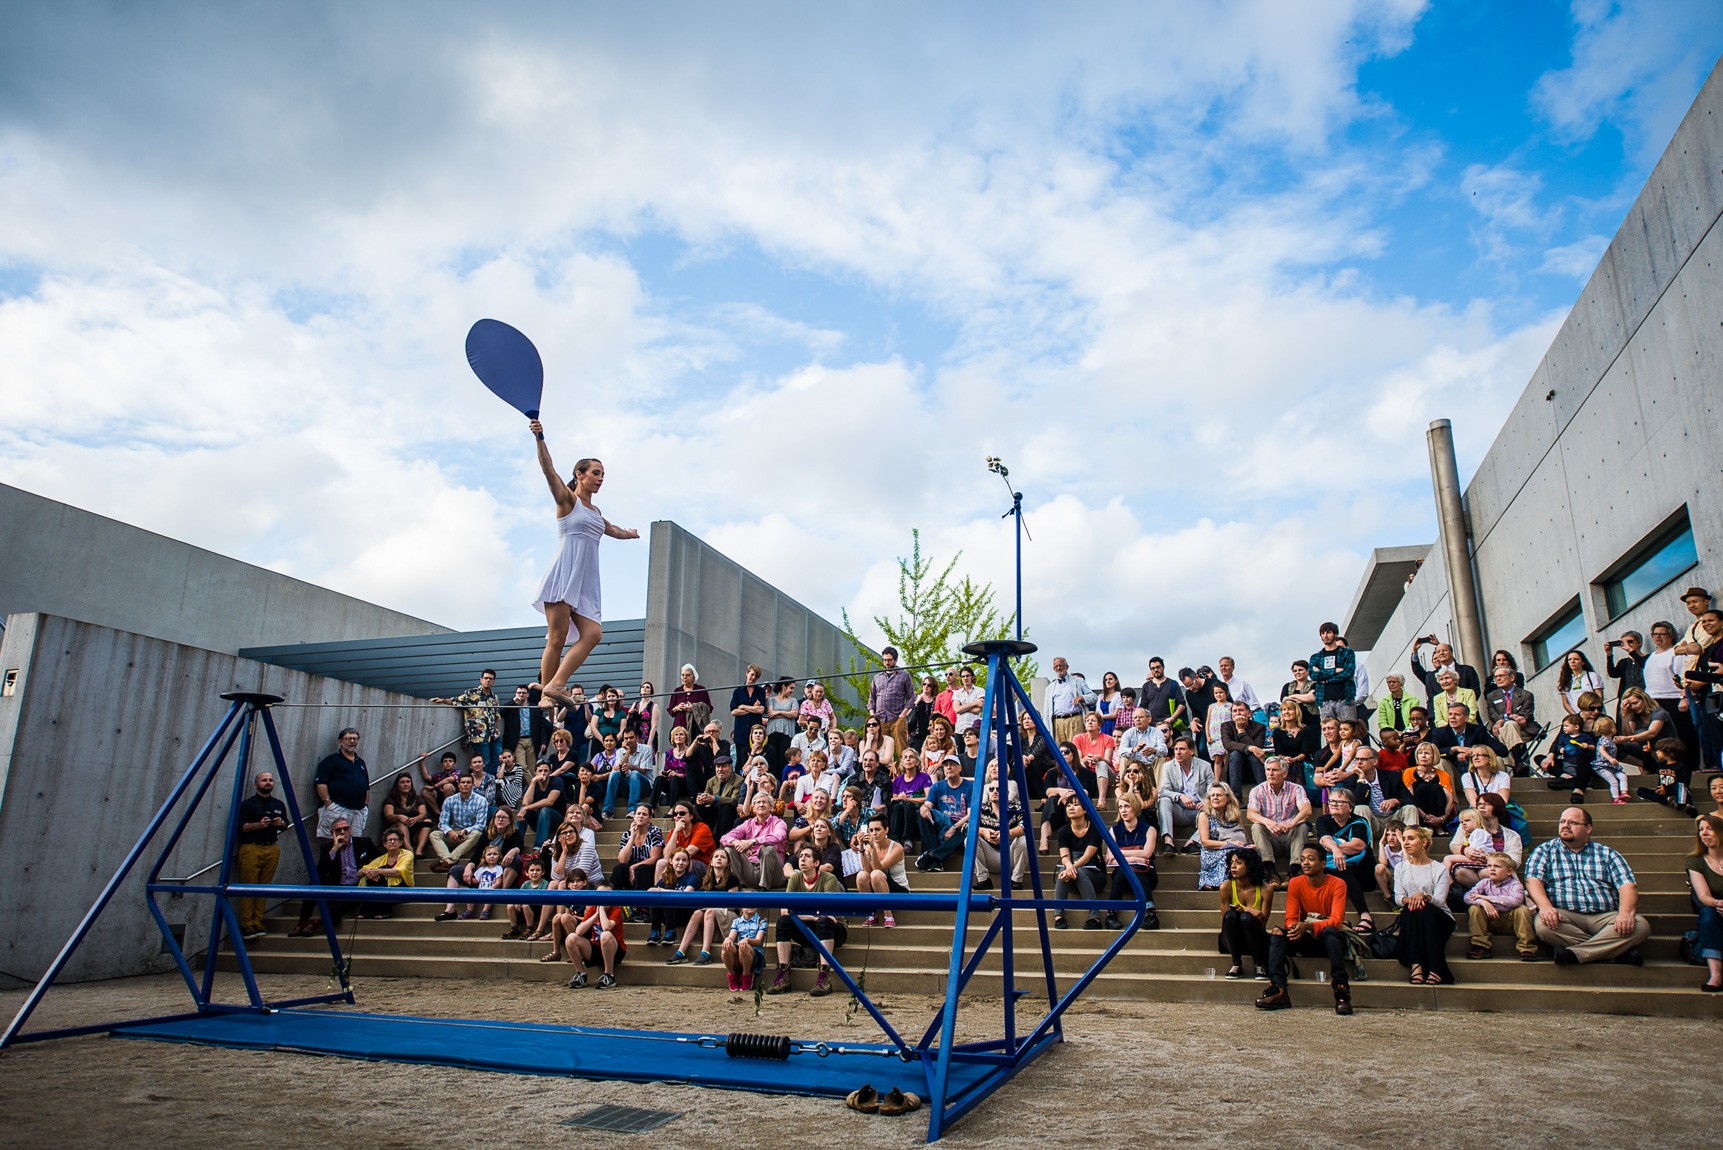 An acrobat holding a blue balancing fan walks on a tightrope in the Courtyard for a large audience gathered on the stairs.